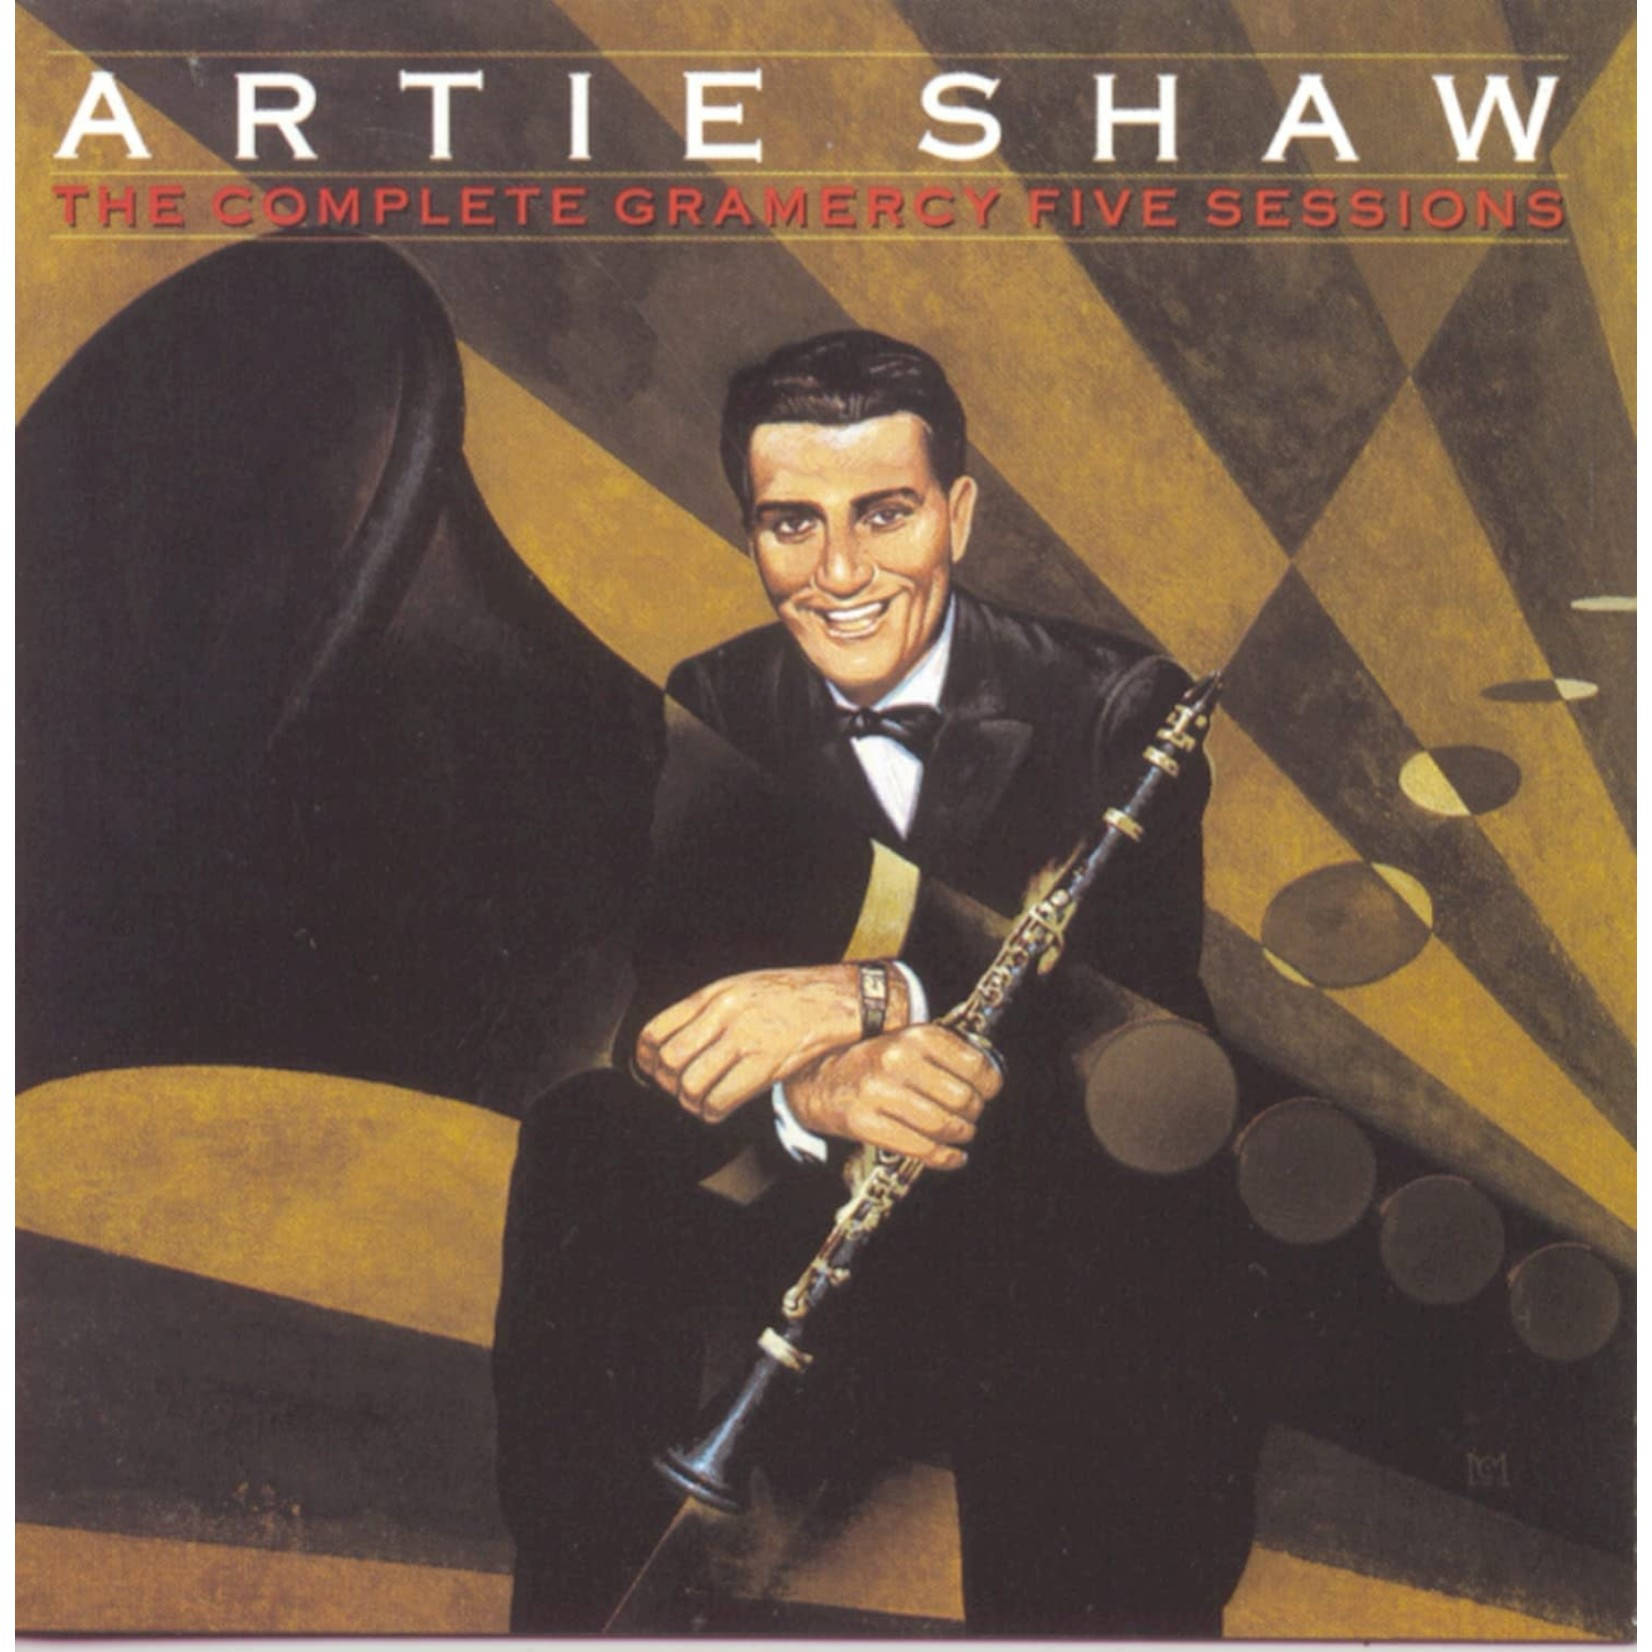 Artie Shaw The Complete Gramercy Five Sessions 1989 Cover Wallpaper